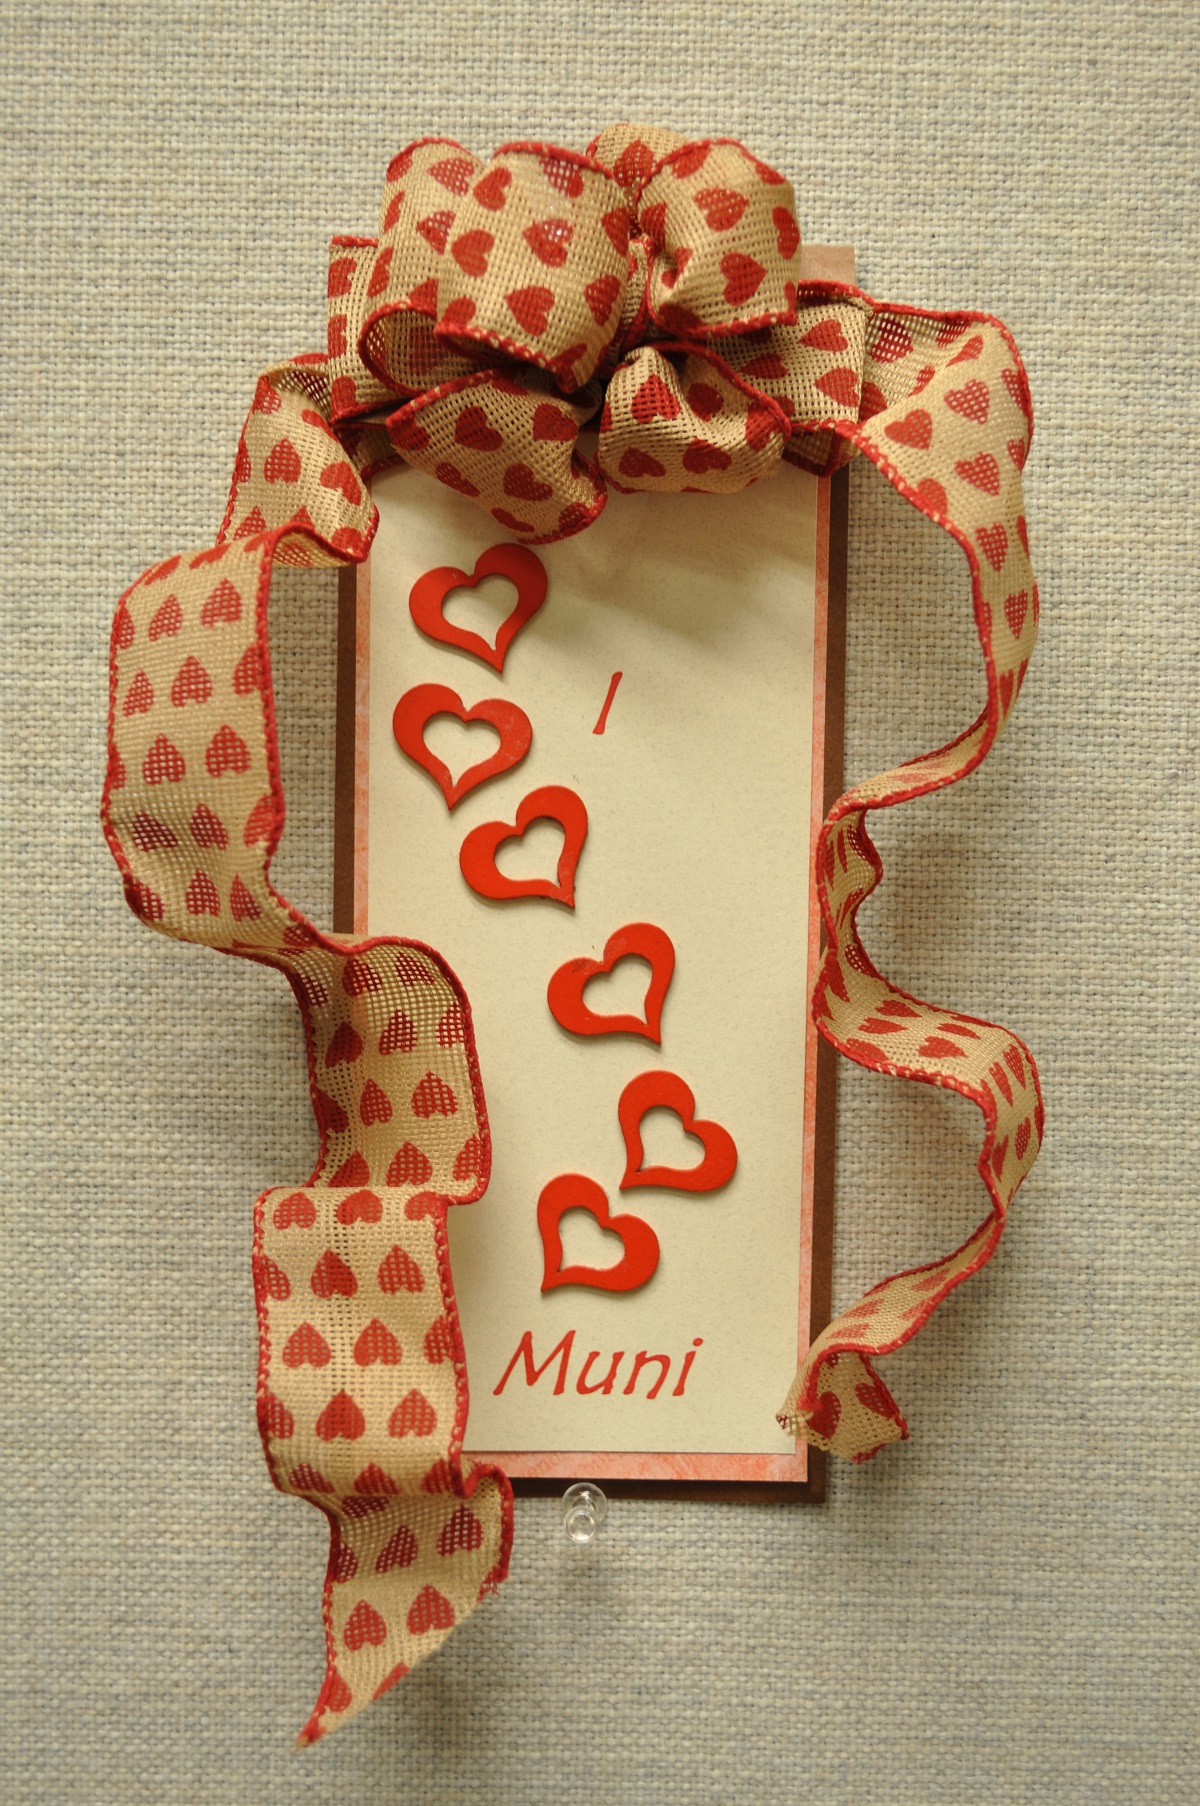 Hand-made valentine with the message "I "heart" Muni," adorned with a burlap heart ribbon.